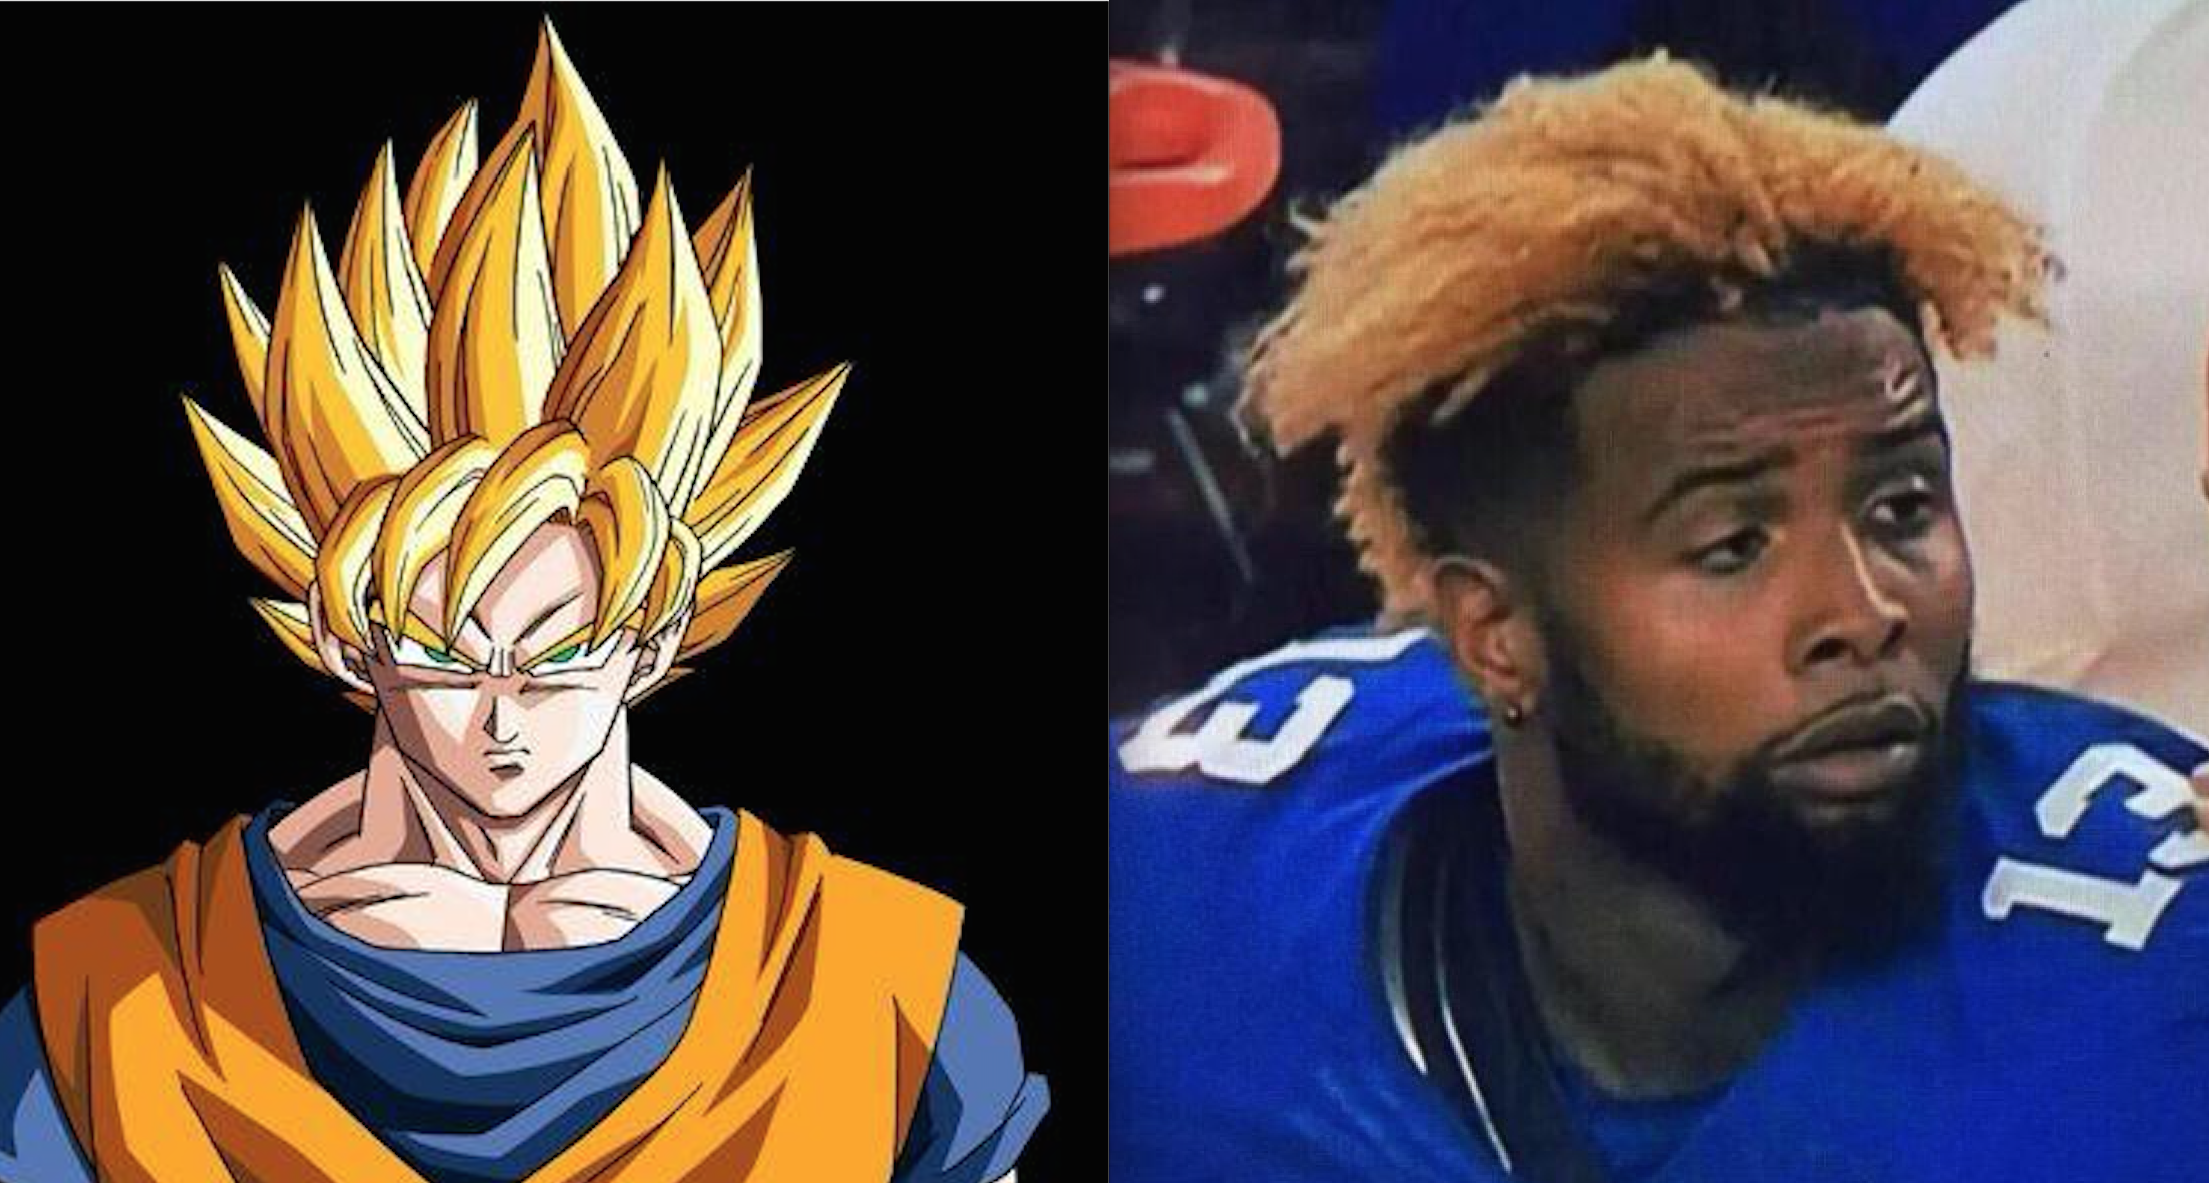 I Dont Know Why People Are Making Fun Of Odell Beckham Jrs Hair